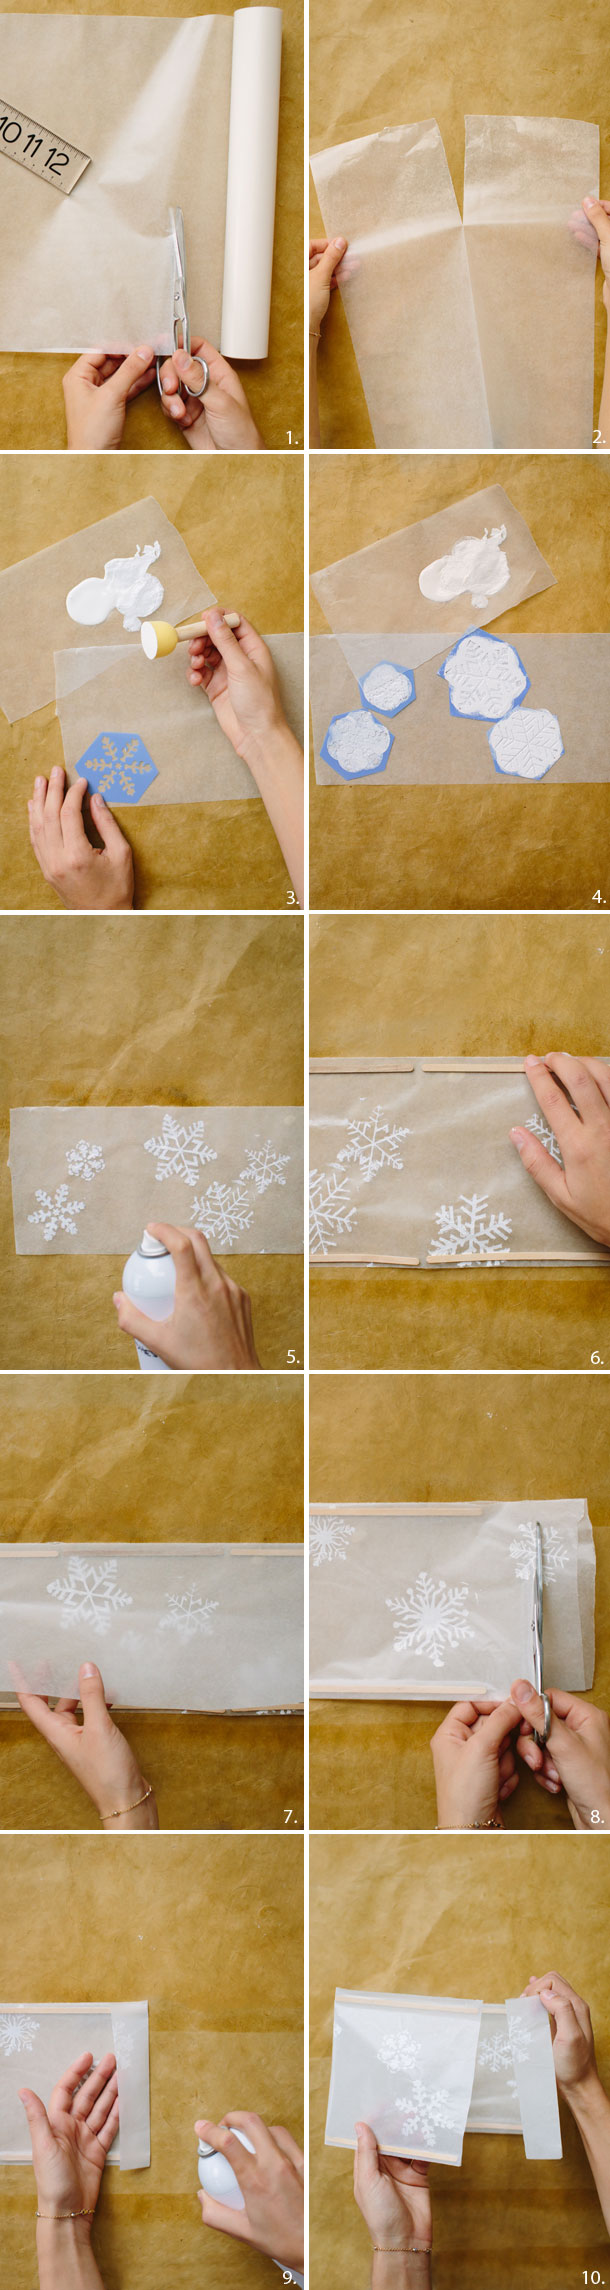 DIY Waxed Paper Snowflake Lantern | photos by Wynn Myers | Camille Styles